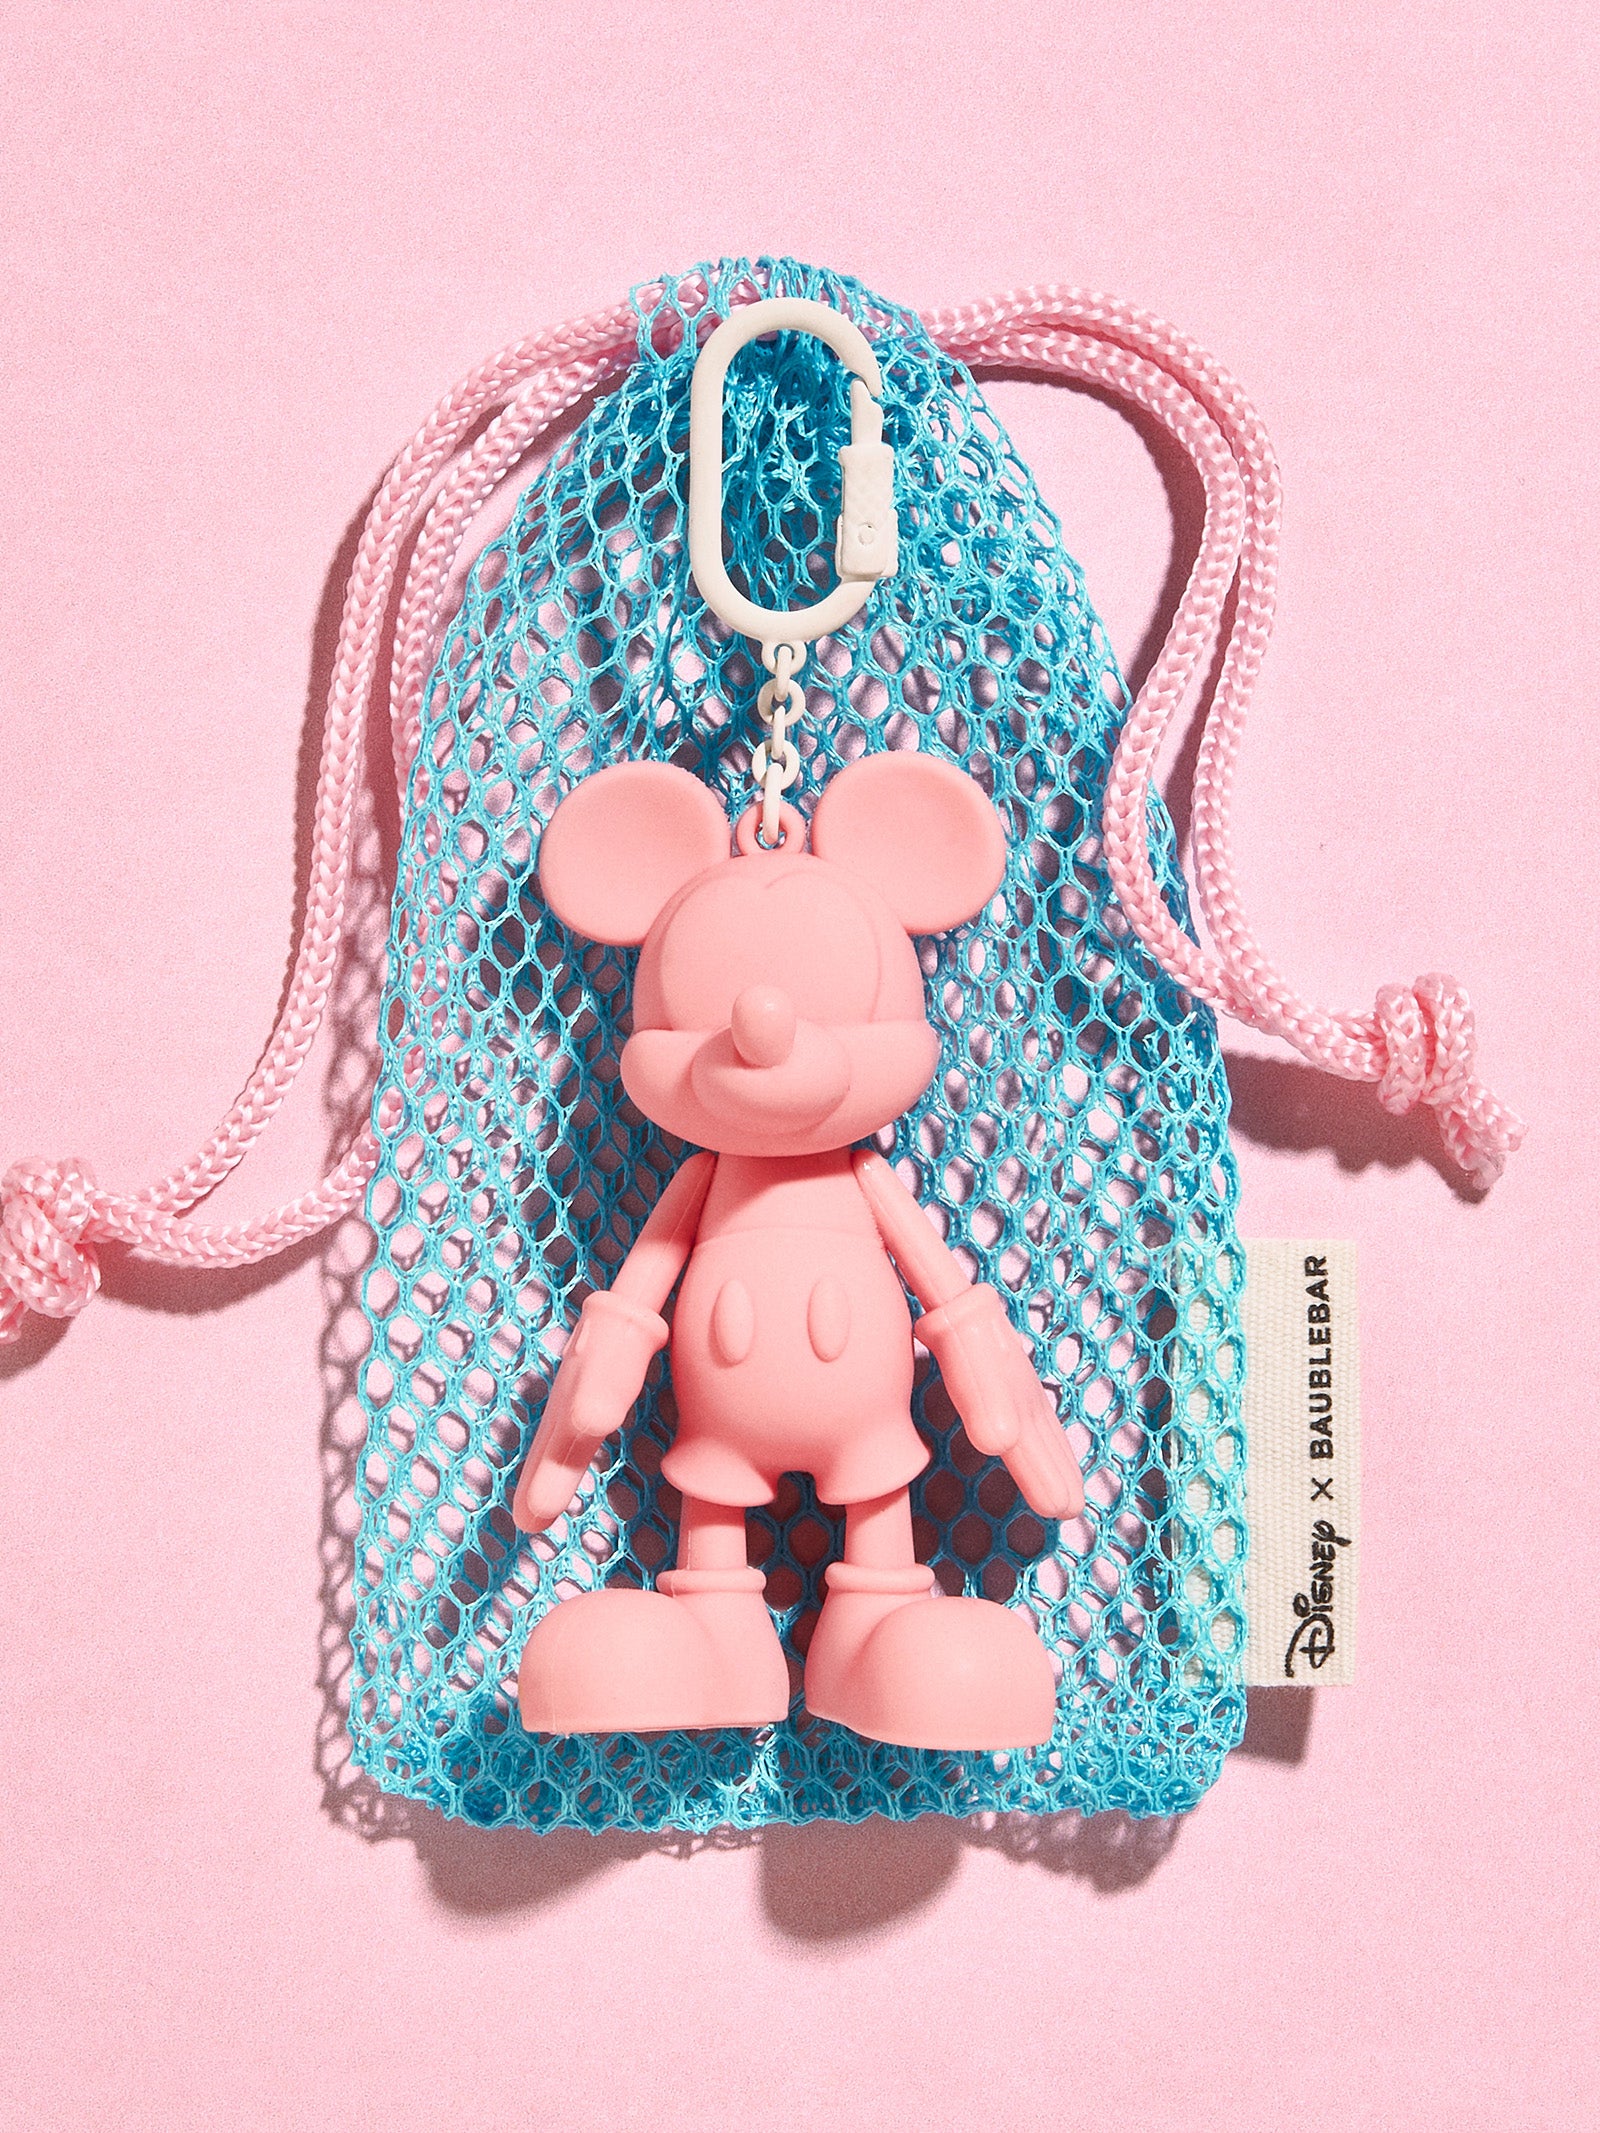 Preorder These New Mickey Mouse Bag Charms from Baublebar - WDW Magazine